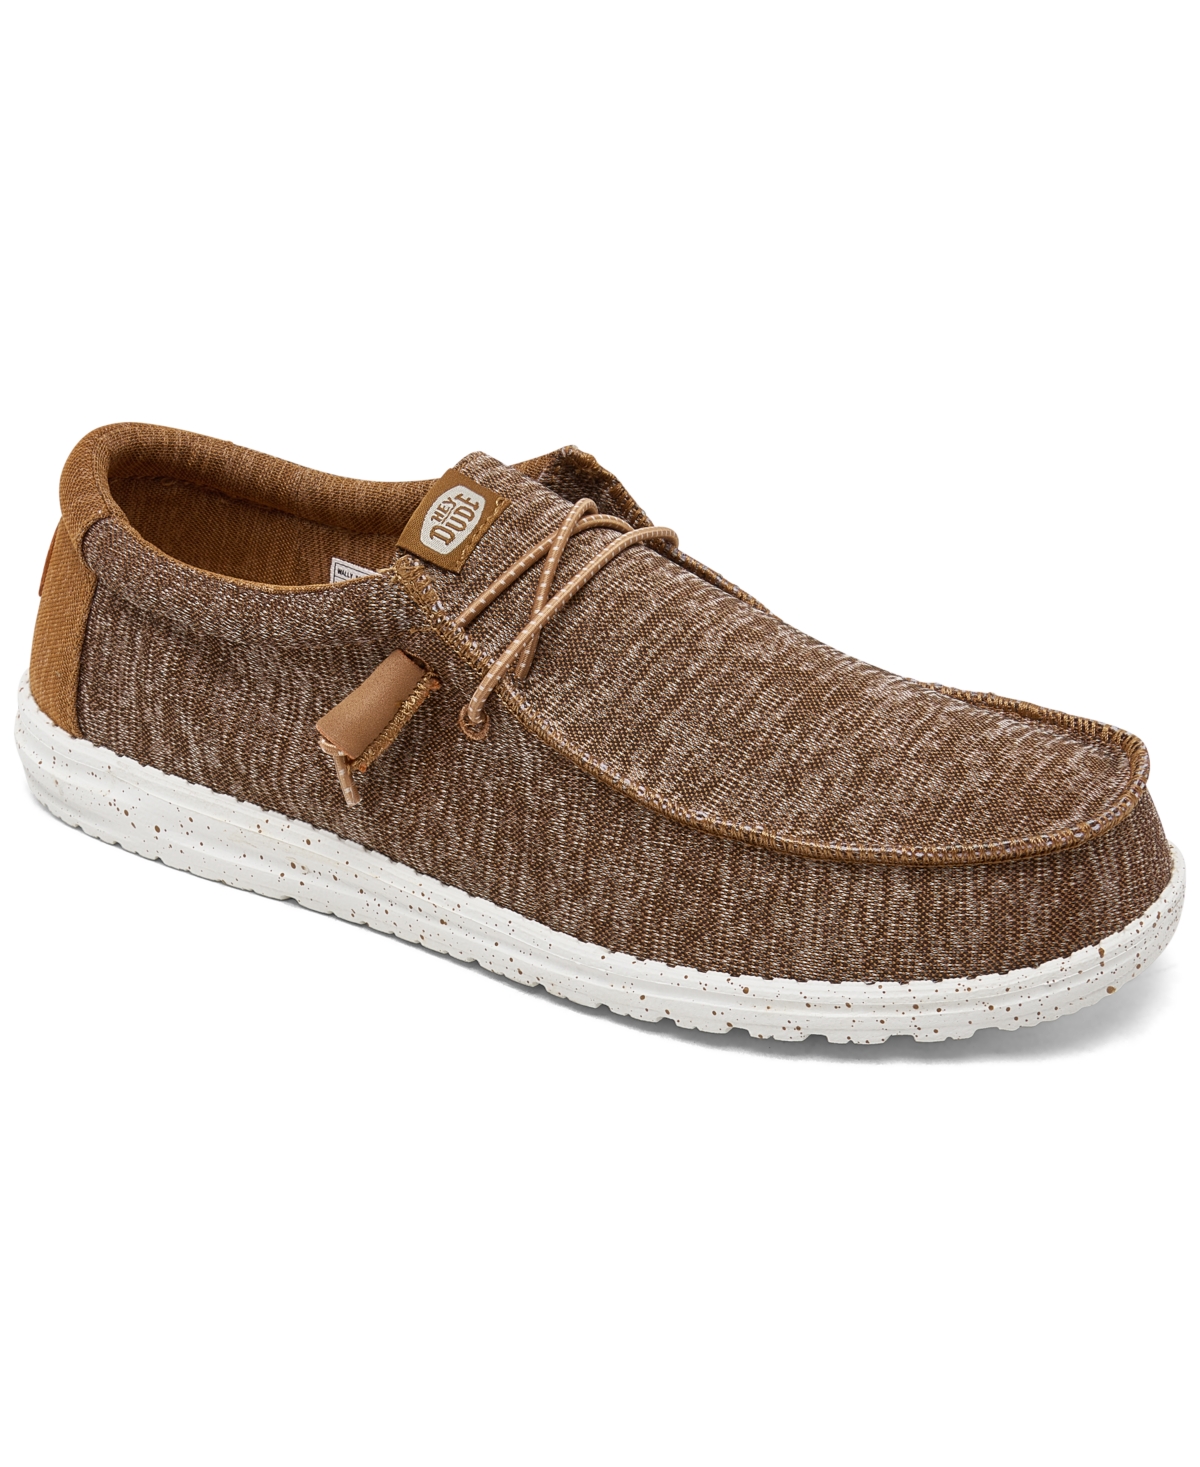 Men's Wally Sport Knit Casual Moccasin Sneakers from Finish Line - Walnut